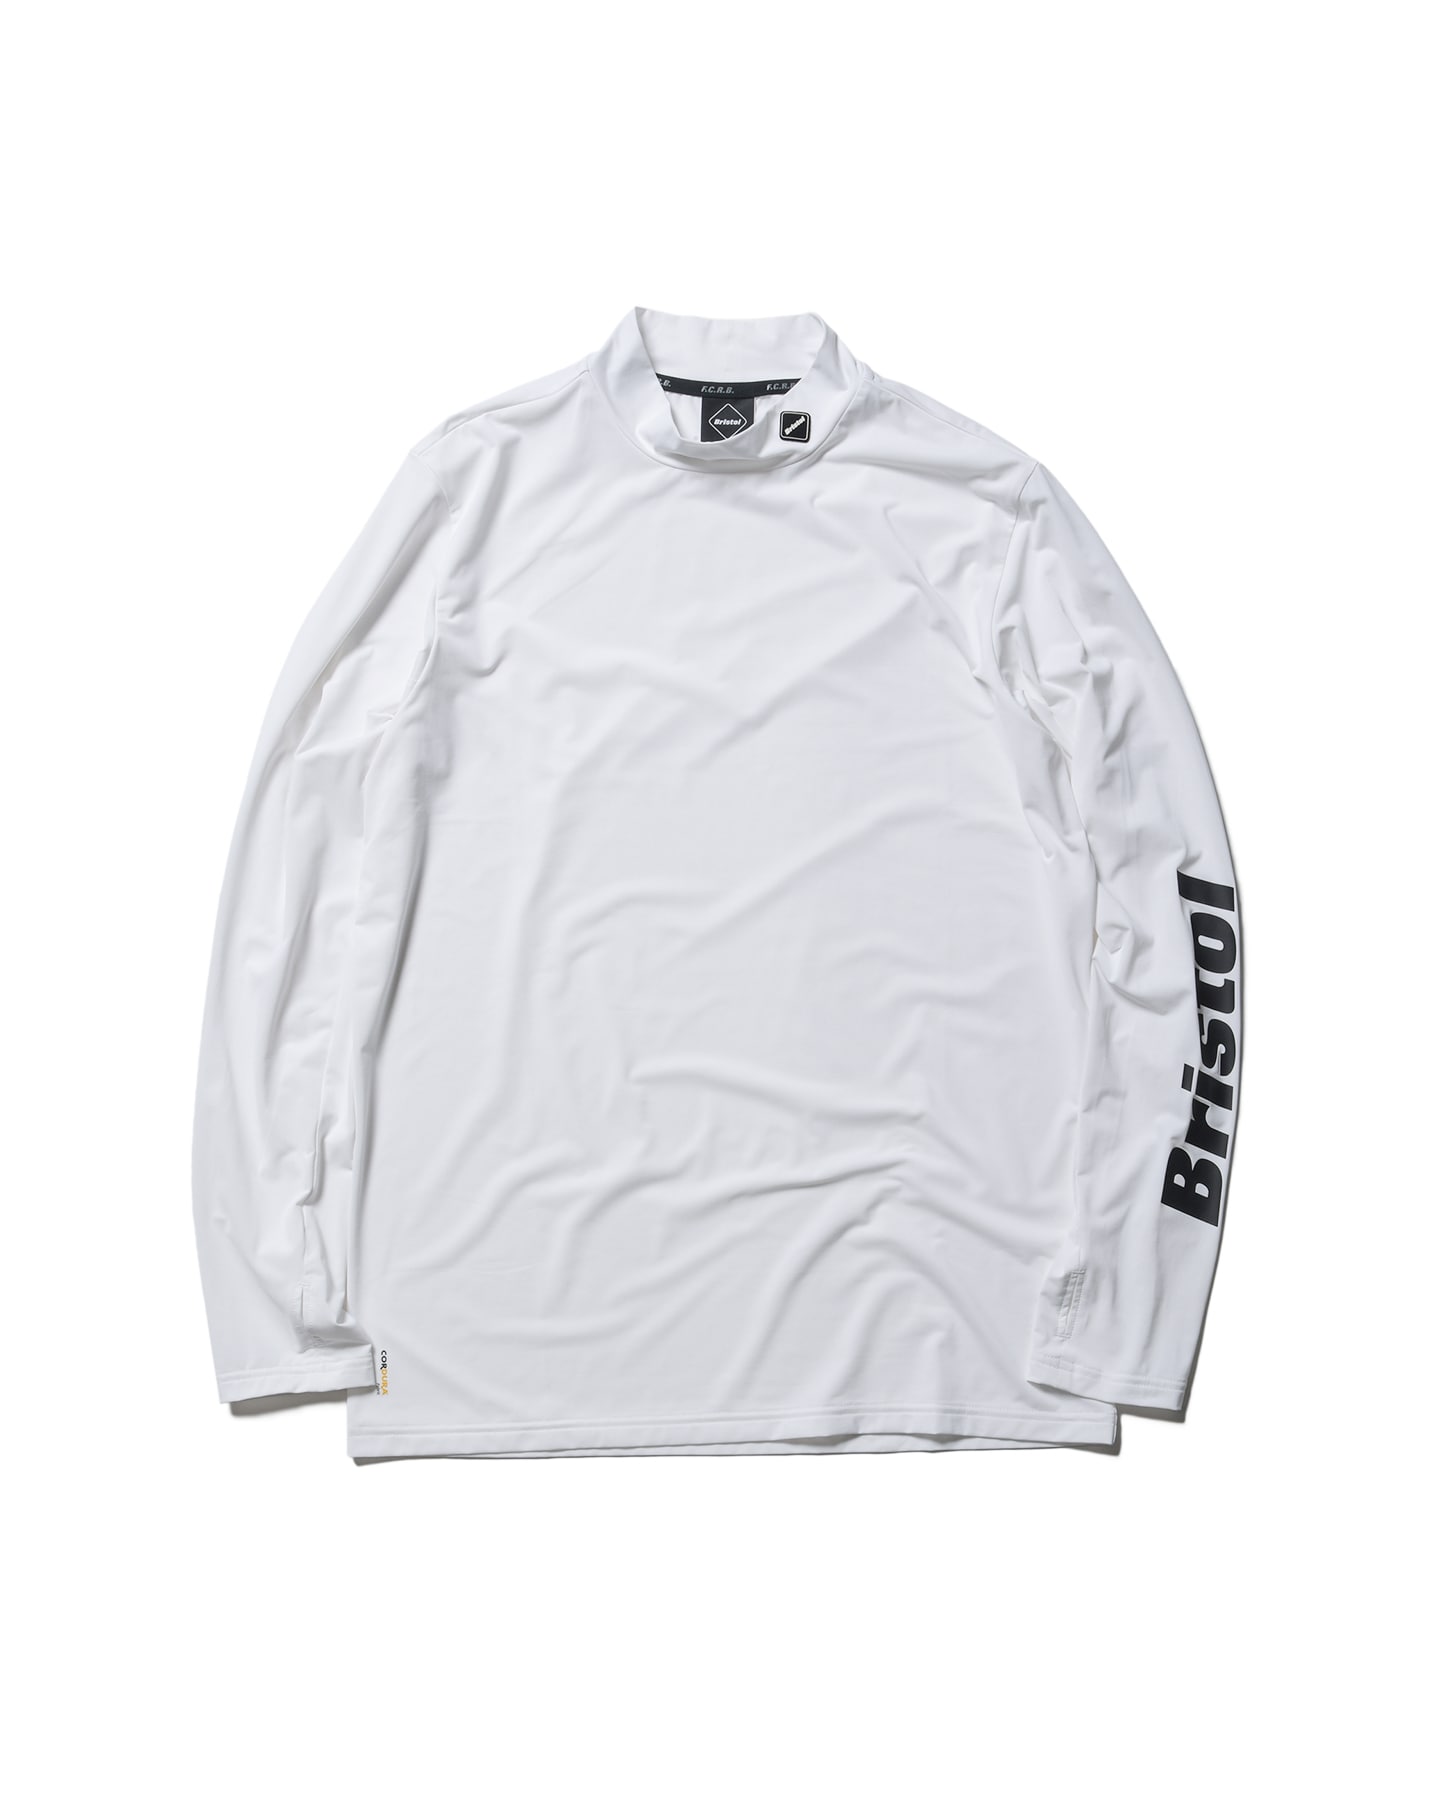 SOPH. | COOL TOUCH L/S MOCKNECK TOP(M WHITE):